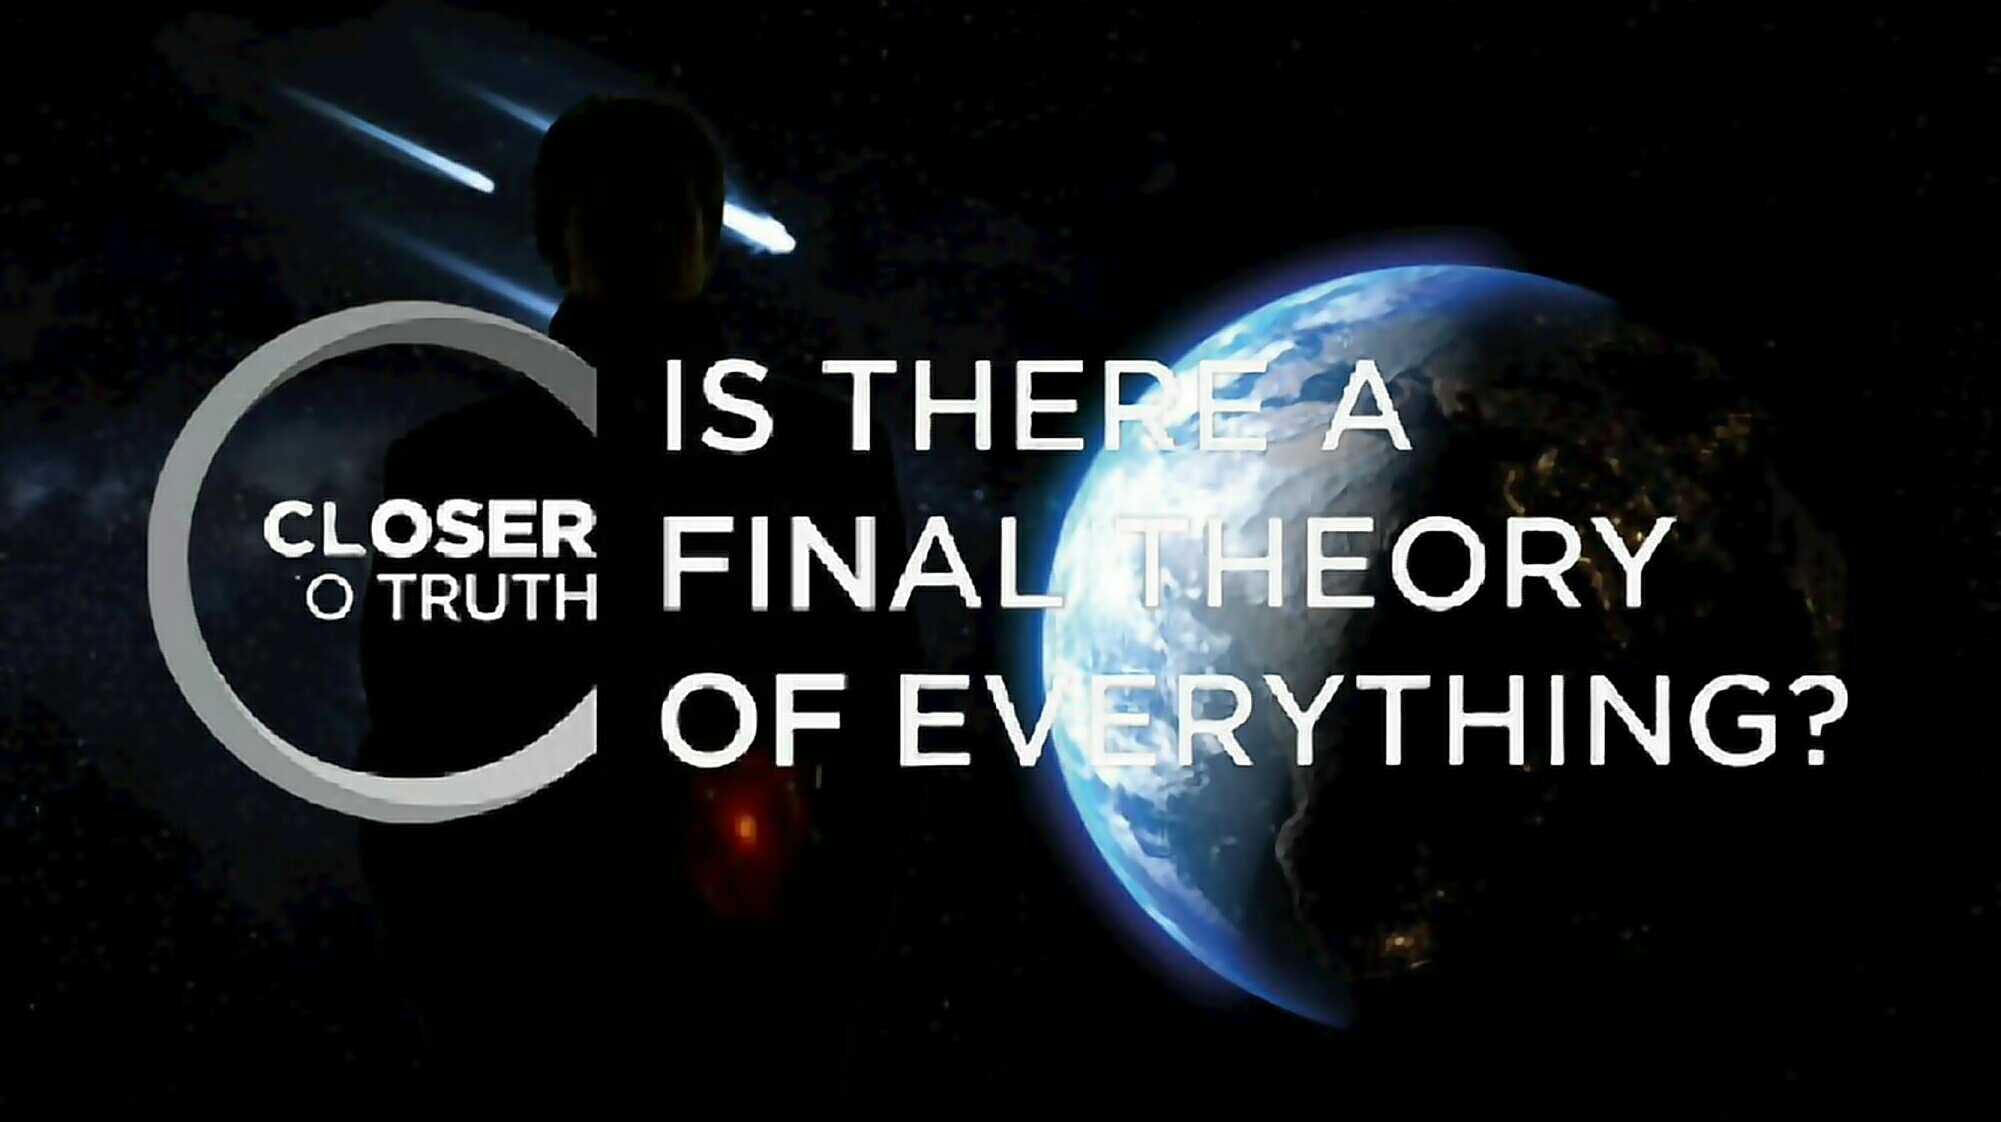 IS THERE A FINAL THEORY OF EVERYTHING? HOW CLOSE ARE WE?